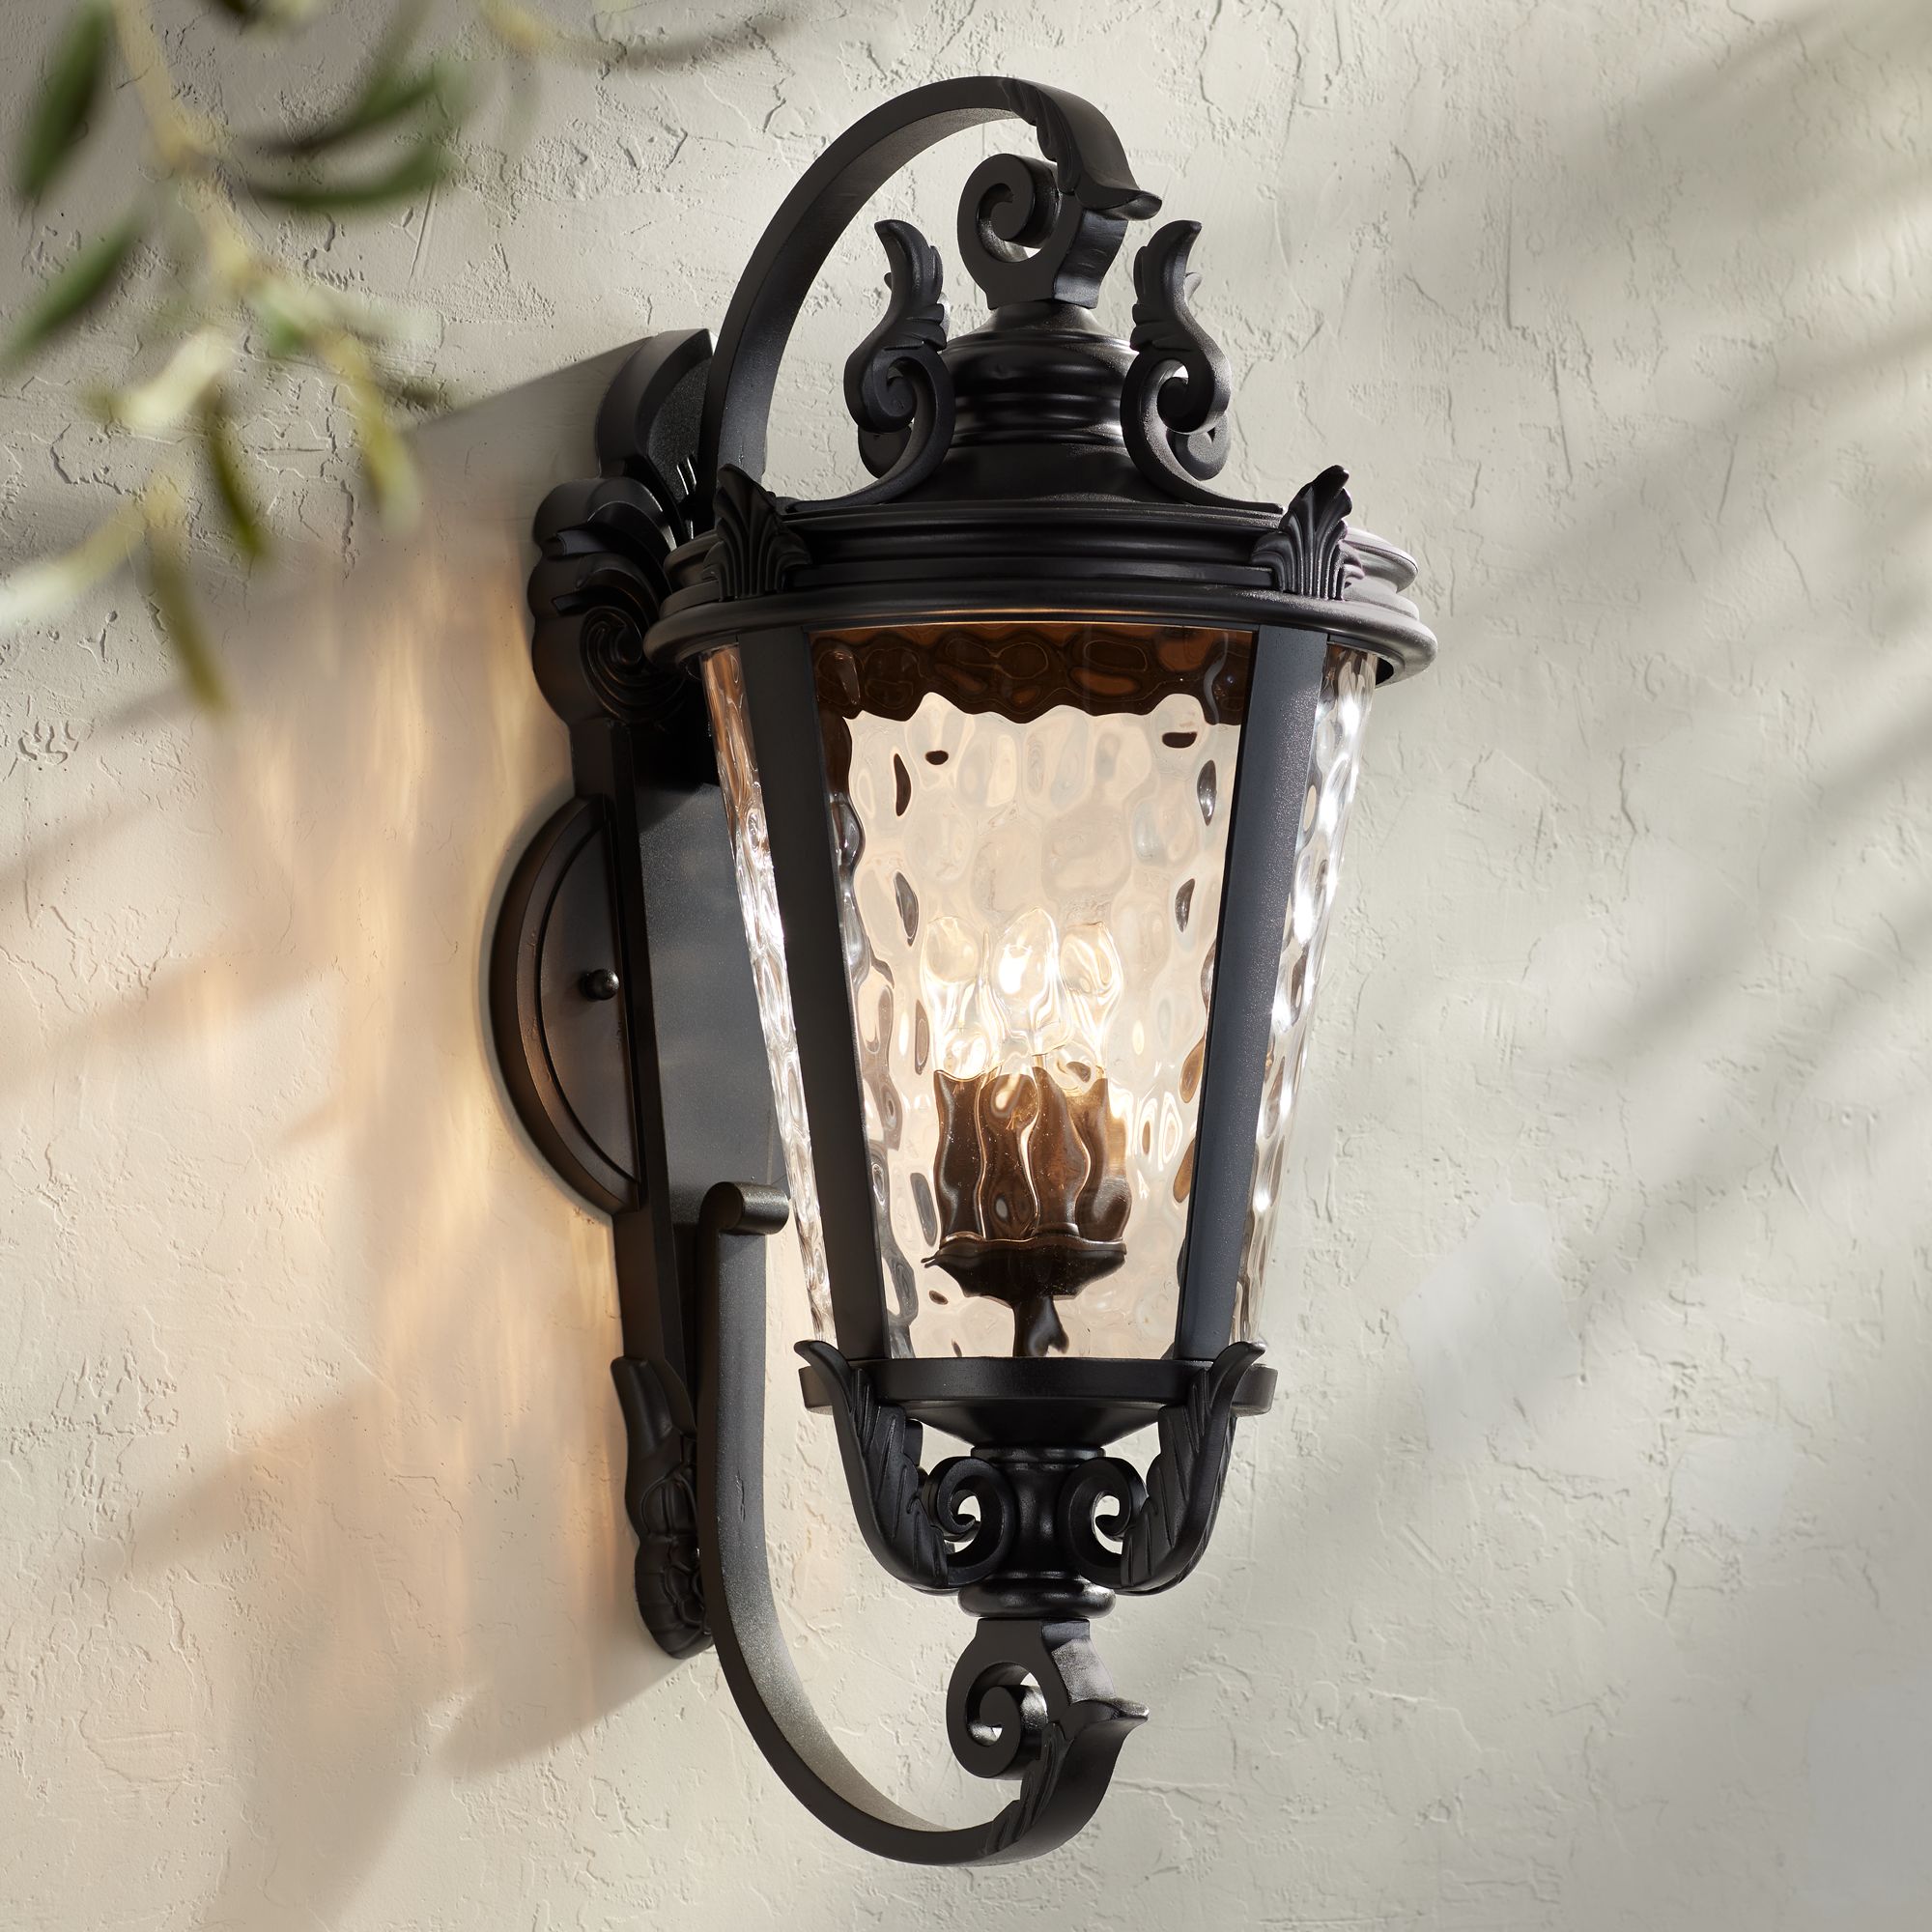 Large Outdoor Wall Lights - Fixtures 31 In. High and Up | Lamps Plus